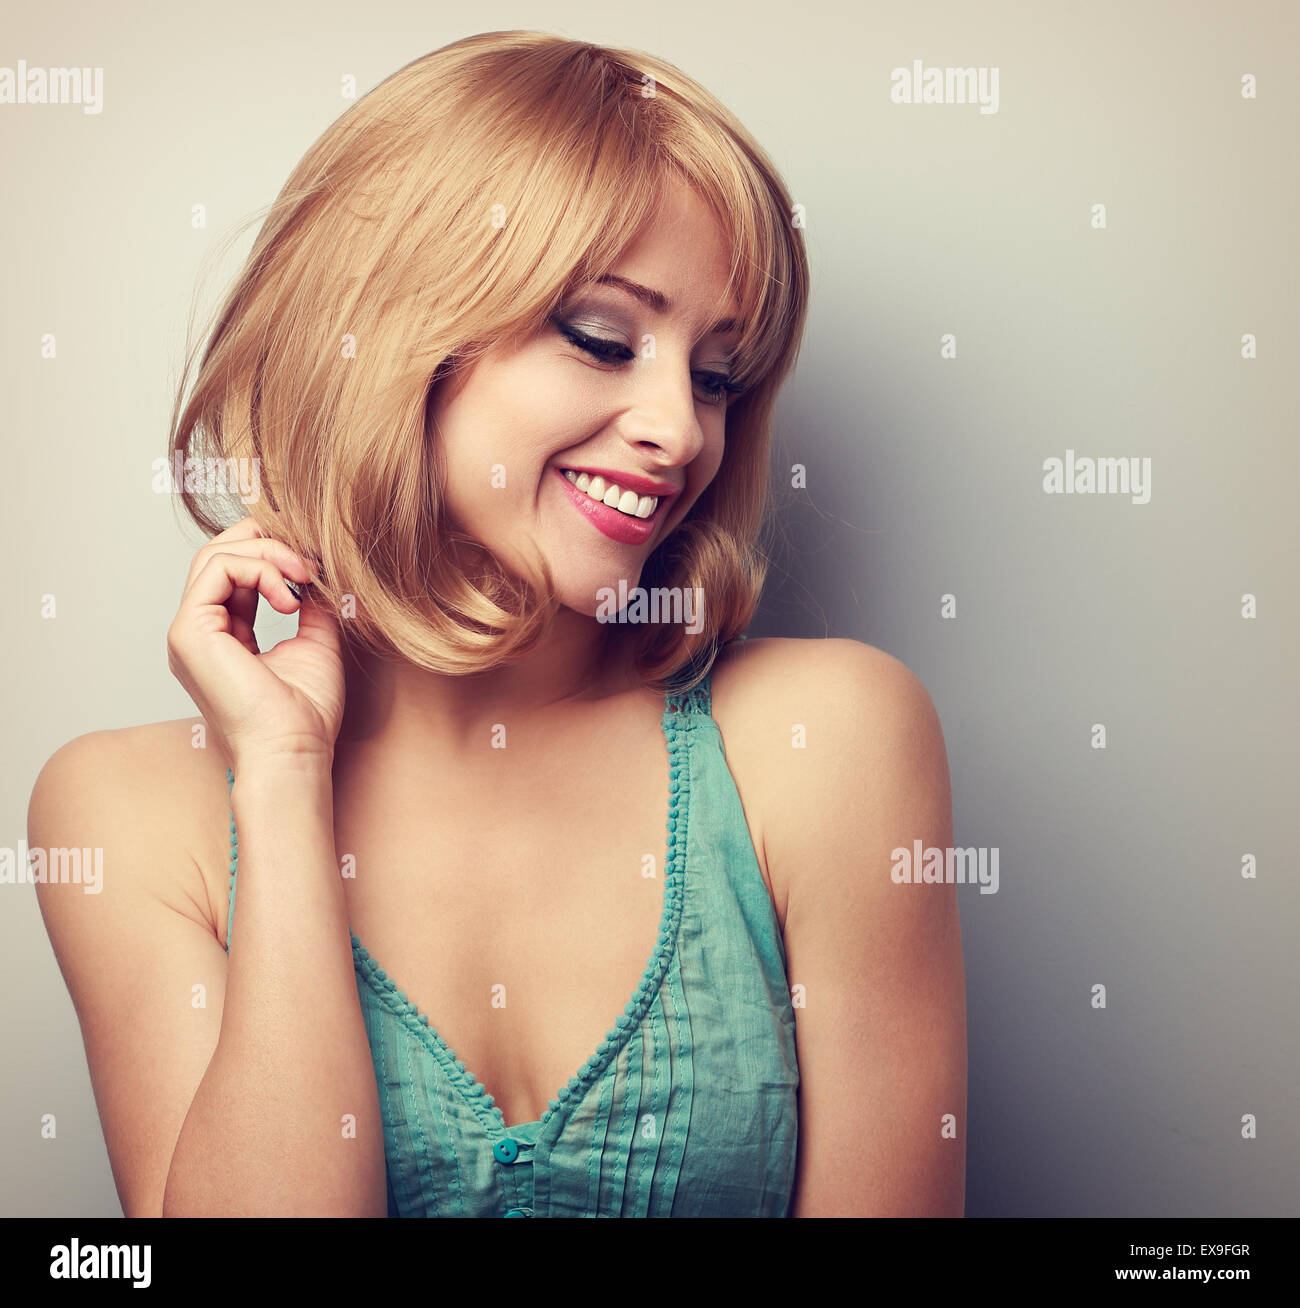 Pretty blond young woman with short hairstyle looking down. Natural smile. Color toned portrait Stock Photo